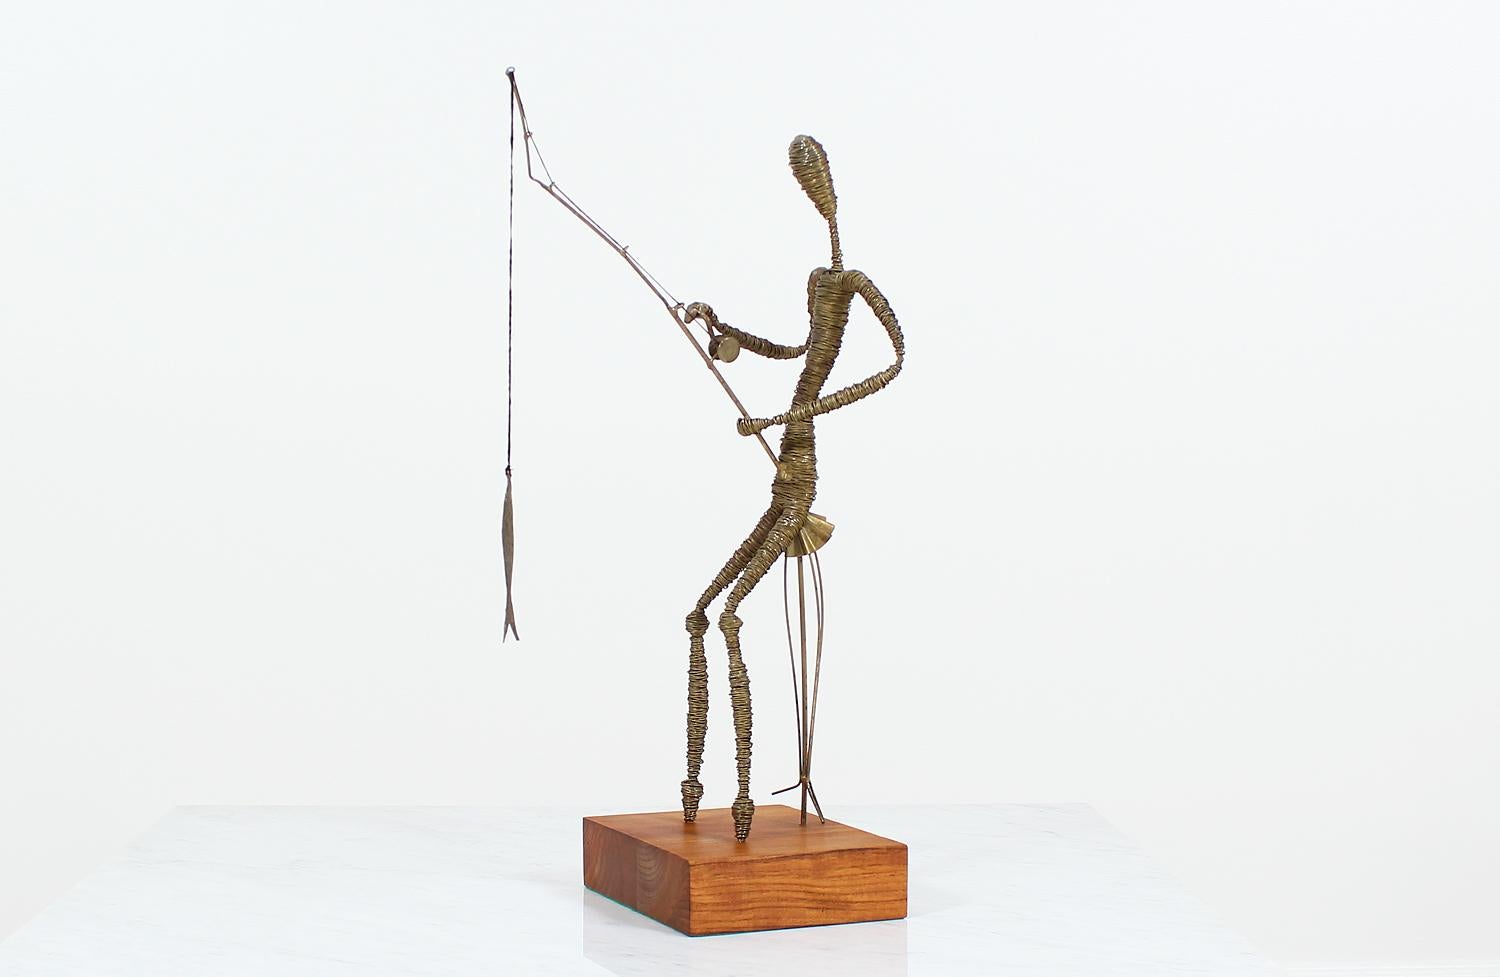 Mid-Century abstract sculpture made in the United States circa 1960’s. This metal fisherman sculpture is mounted on a squared teak wood base and shows a beautiful patina on the metal from age. Brass wires are bound together to create an abstract